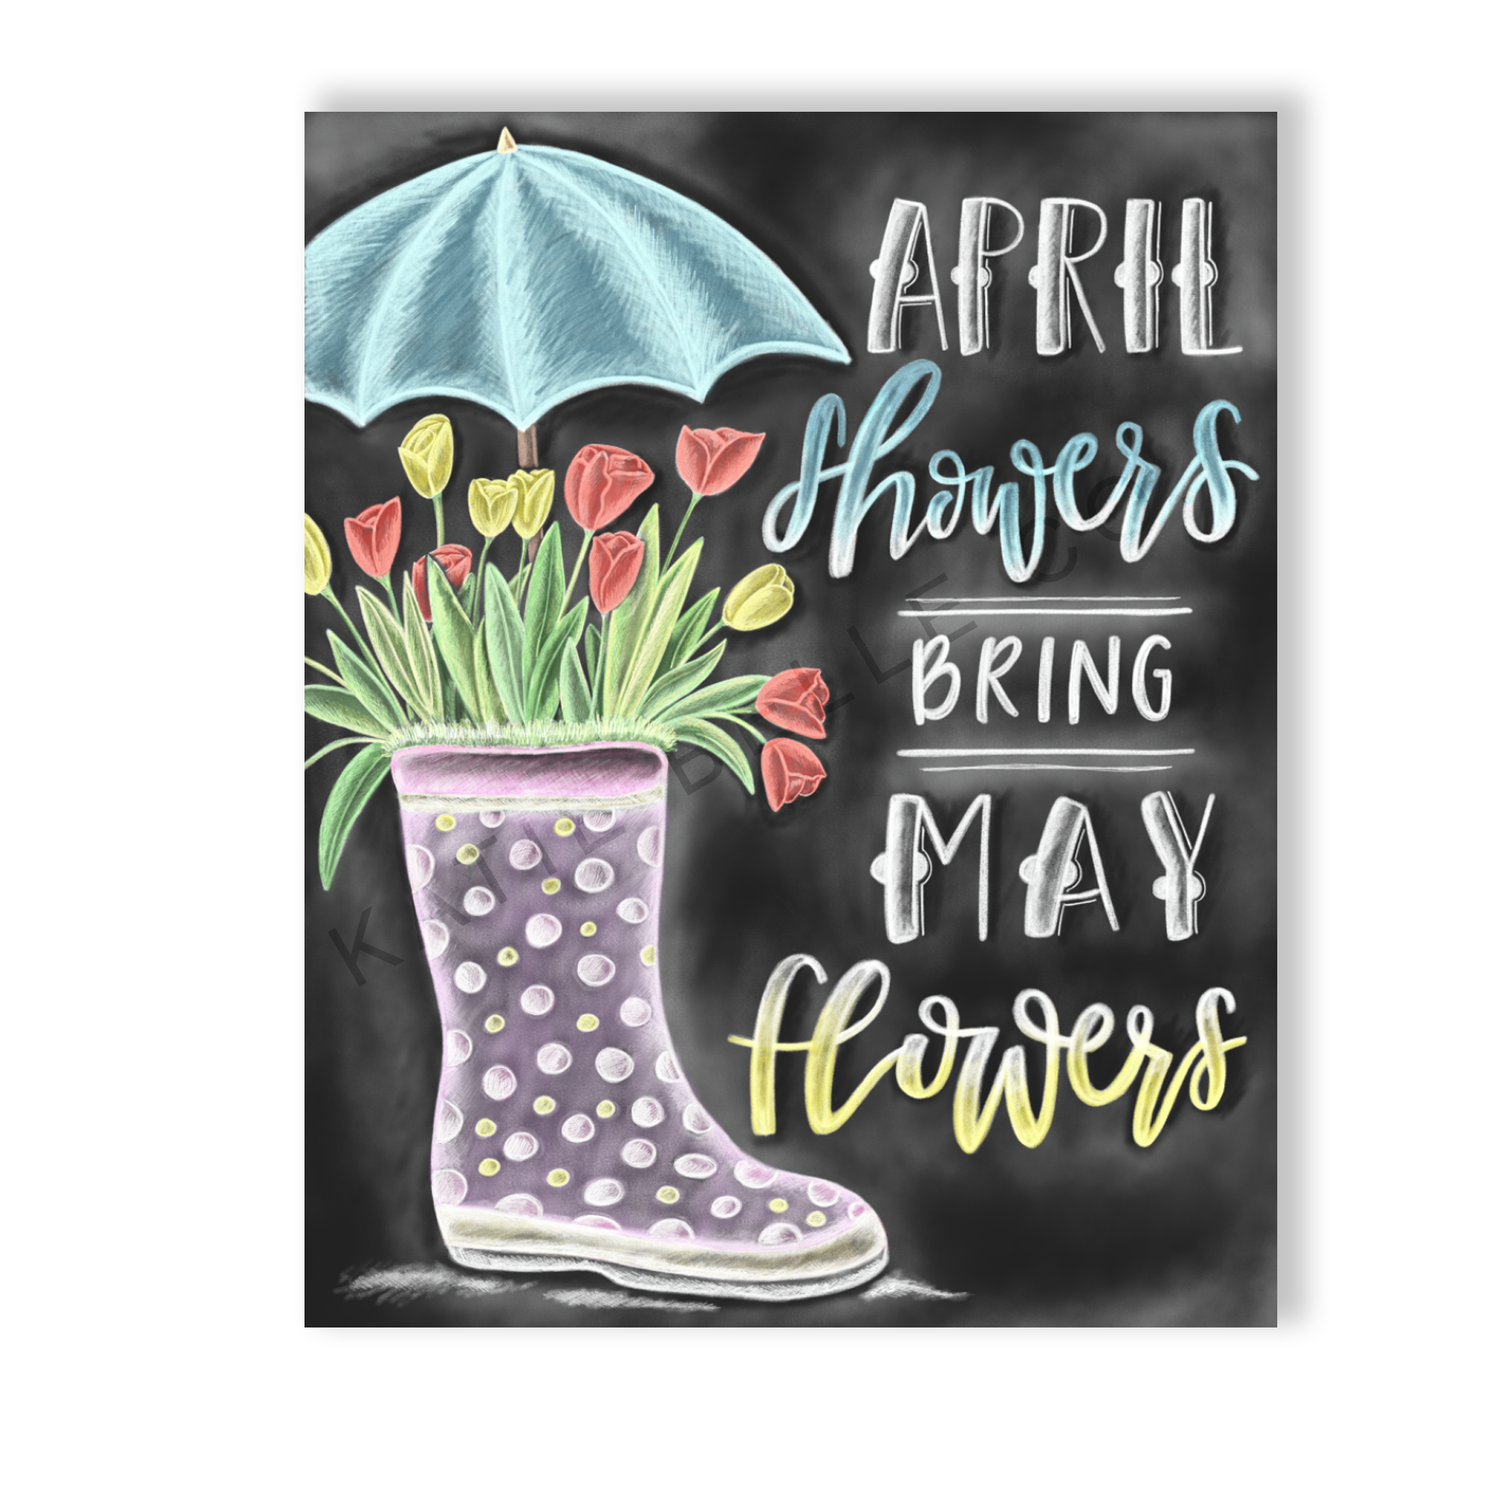 april showers bring may flowers. easter gift. easter decor. easter basket. spring decor. spring artwork. mothers day gifts. katie belle co. tulips in boots. rain boots. Spring tulips. 